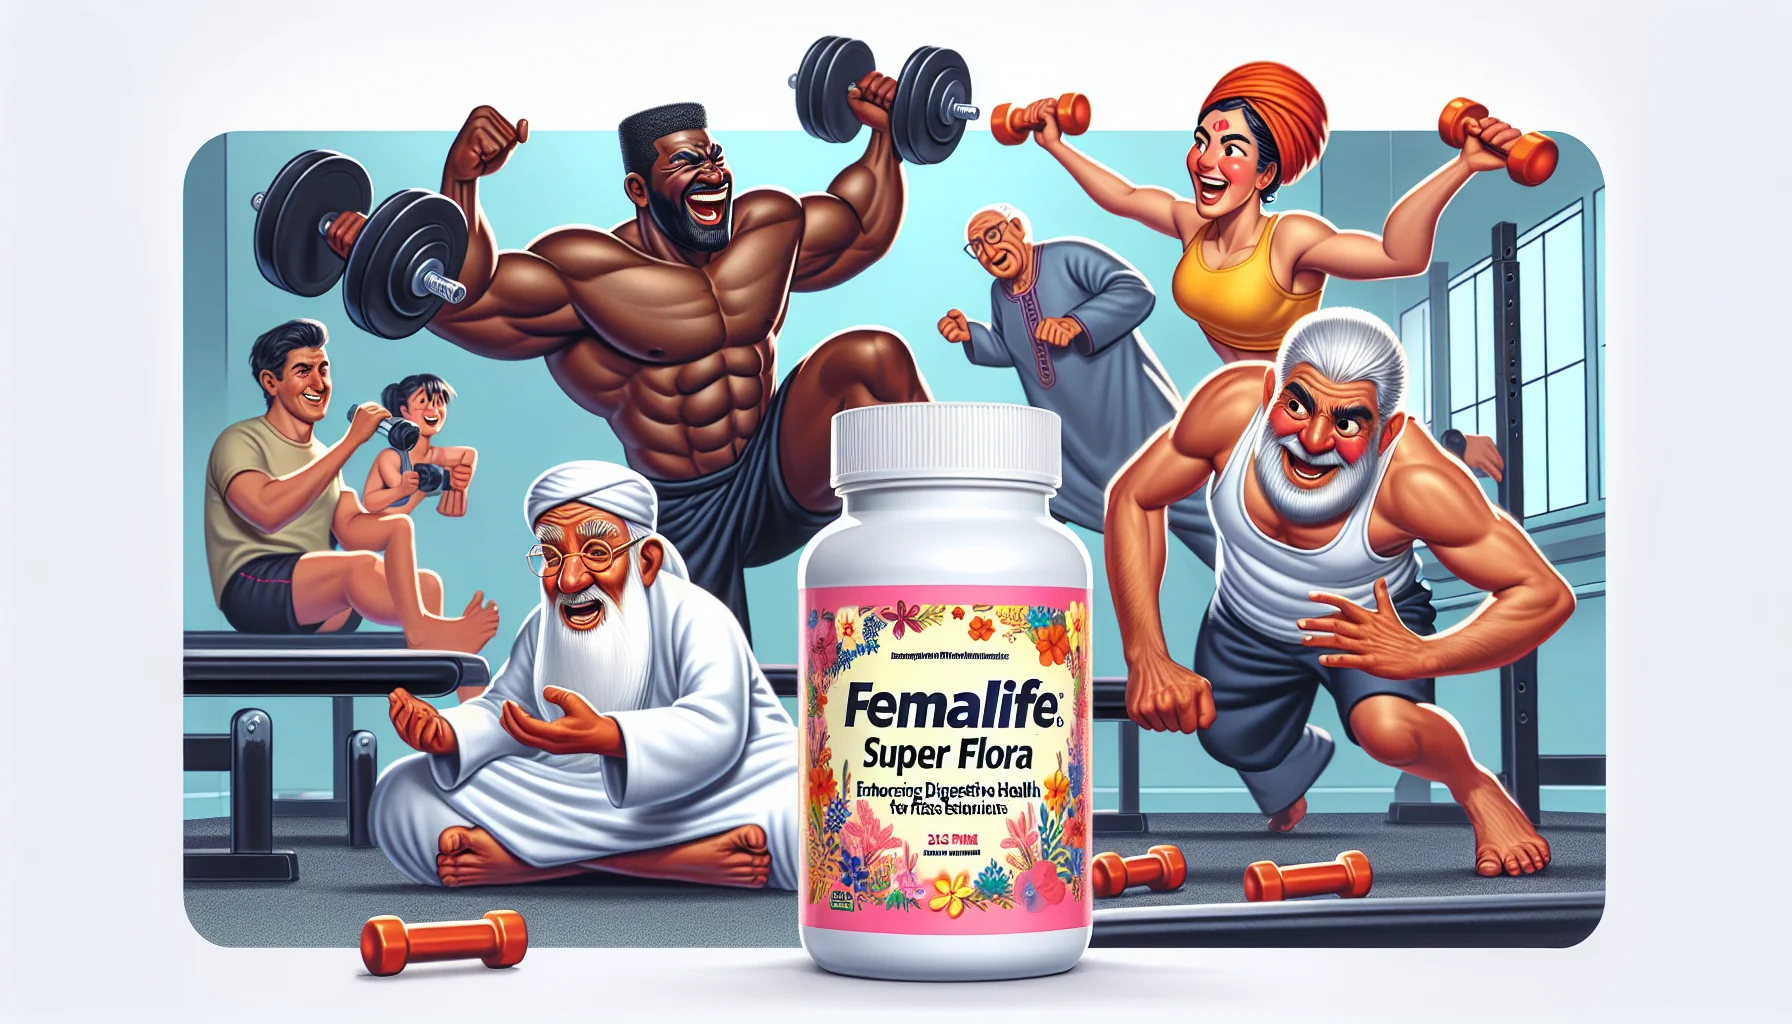 Picture a humorous scenario featuring people getting ready for a fitness session. The foreground shows a vibrant bottle of FemaLife Super Flora Probiotics labeled as 'Enhancing Digestive Health for Fitness Enthusiasts', alongside humorous depictions of energetic characters. Show a muscular Black man laughing as he struggles to open a jar of protein, a South Asian woman in gym attire attempting a yoga pose while precariously balancing her probiotics bottle on her head, and a Middle-Eastern elderly man running towards them holding hand-weights, with an eager look on his face, emphasizing the fun and importance of keeping fit and healthy.